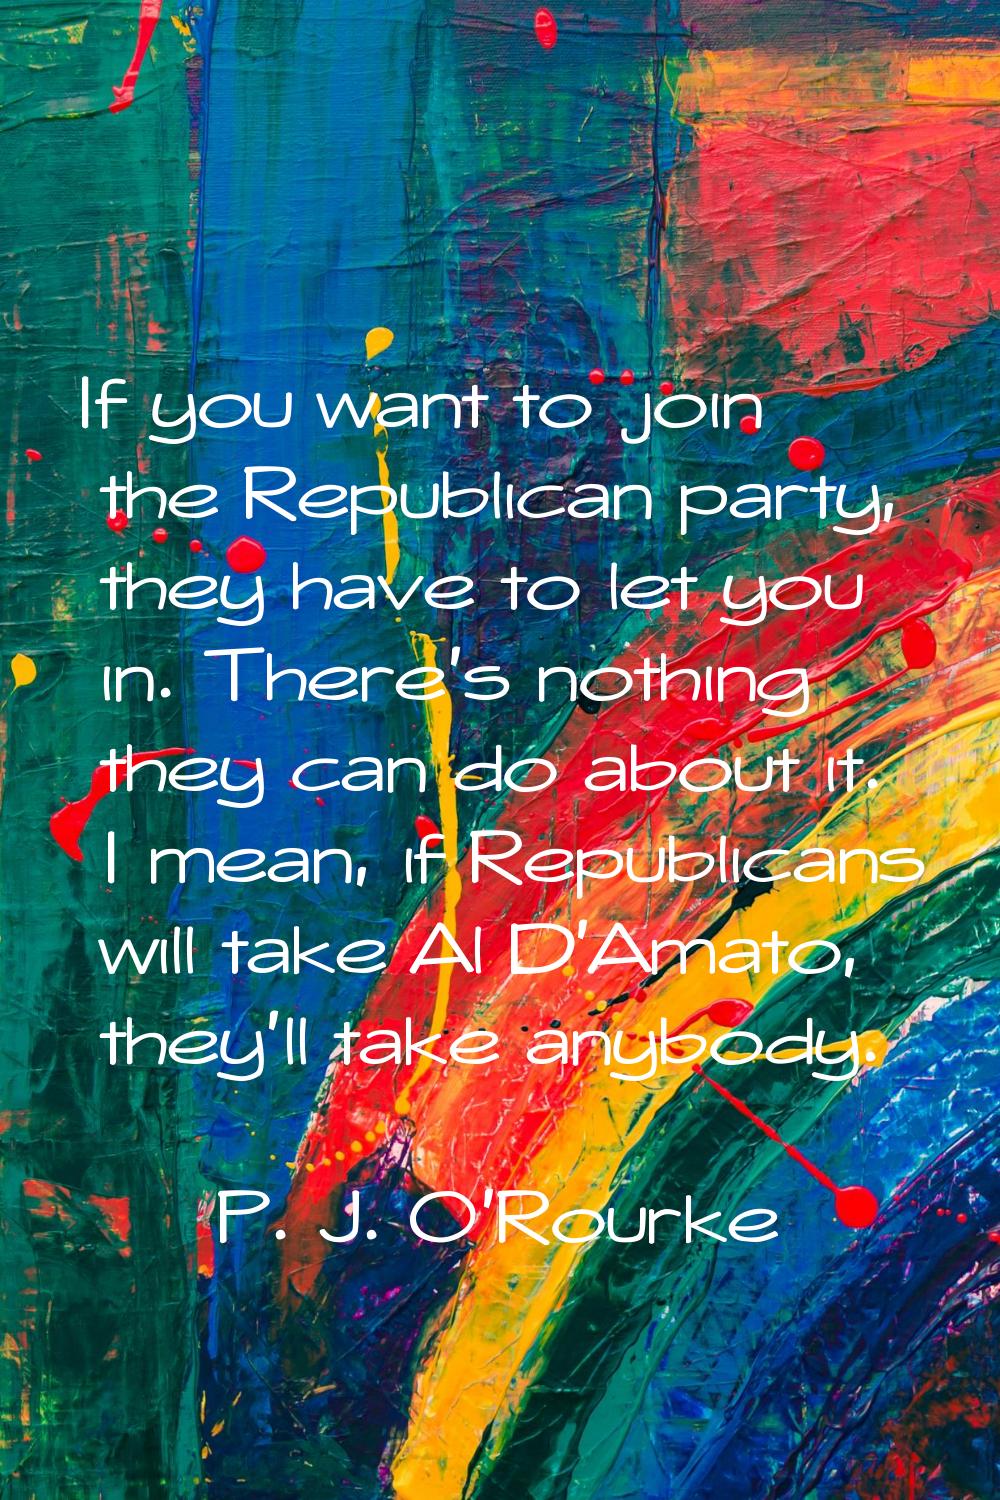 If you want to join the Republican party, they have to let you in. There's nothing they can do abou